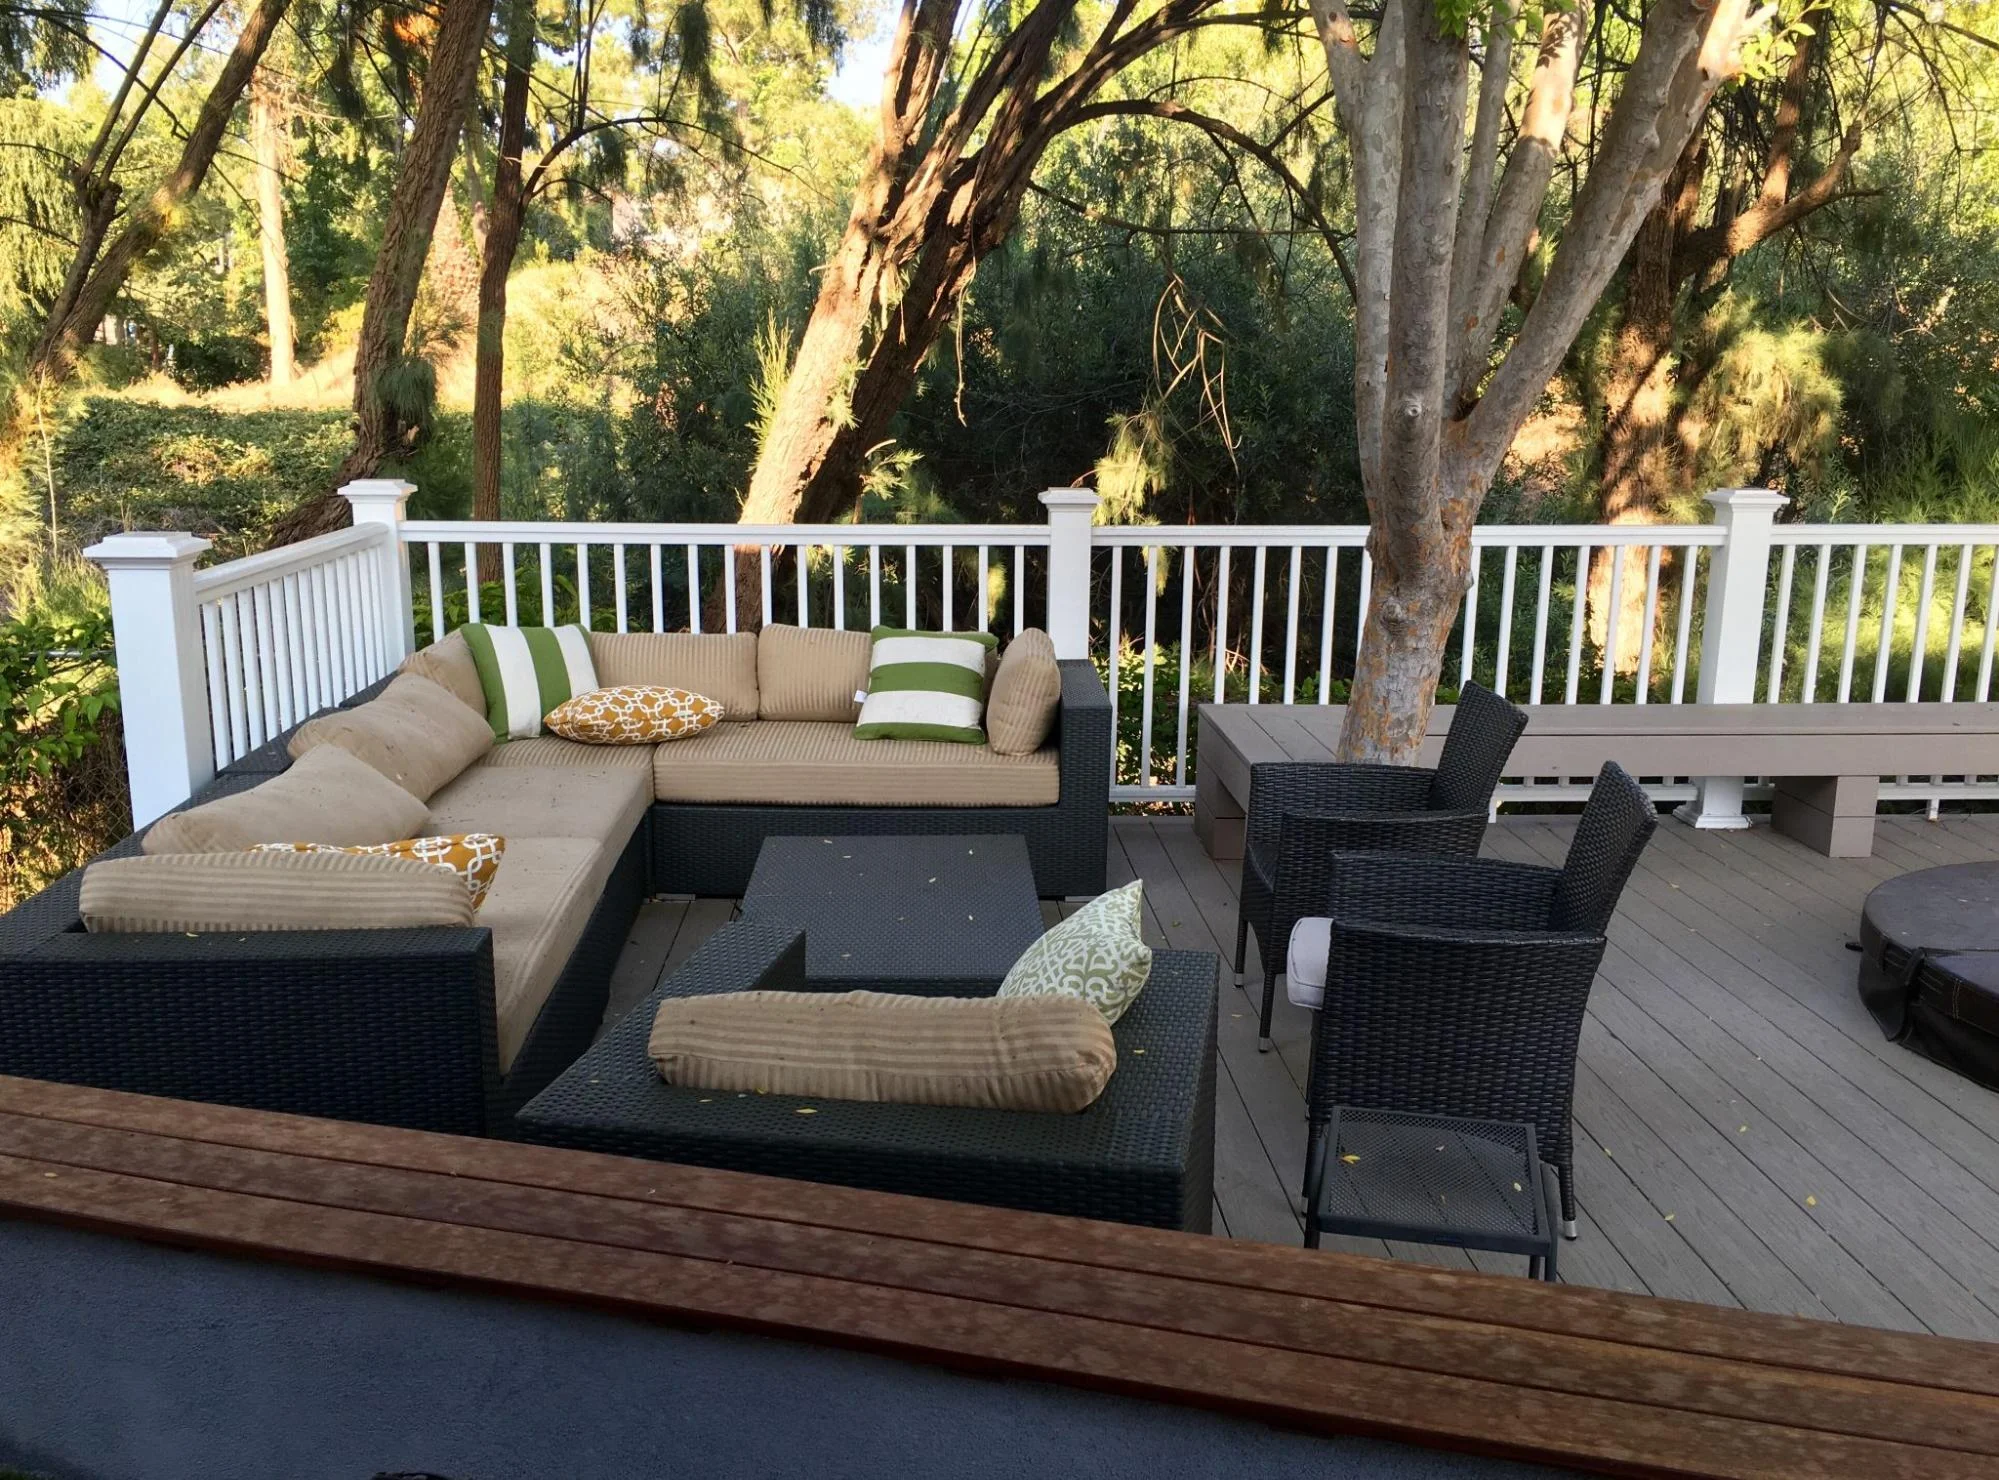 Tips for Repairing and Maintaining Outdoor Decks